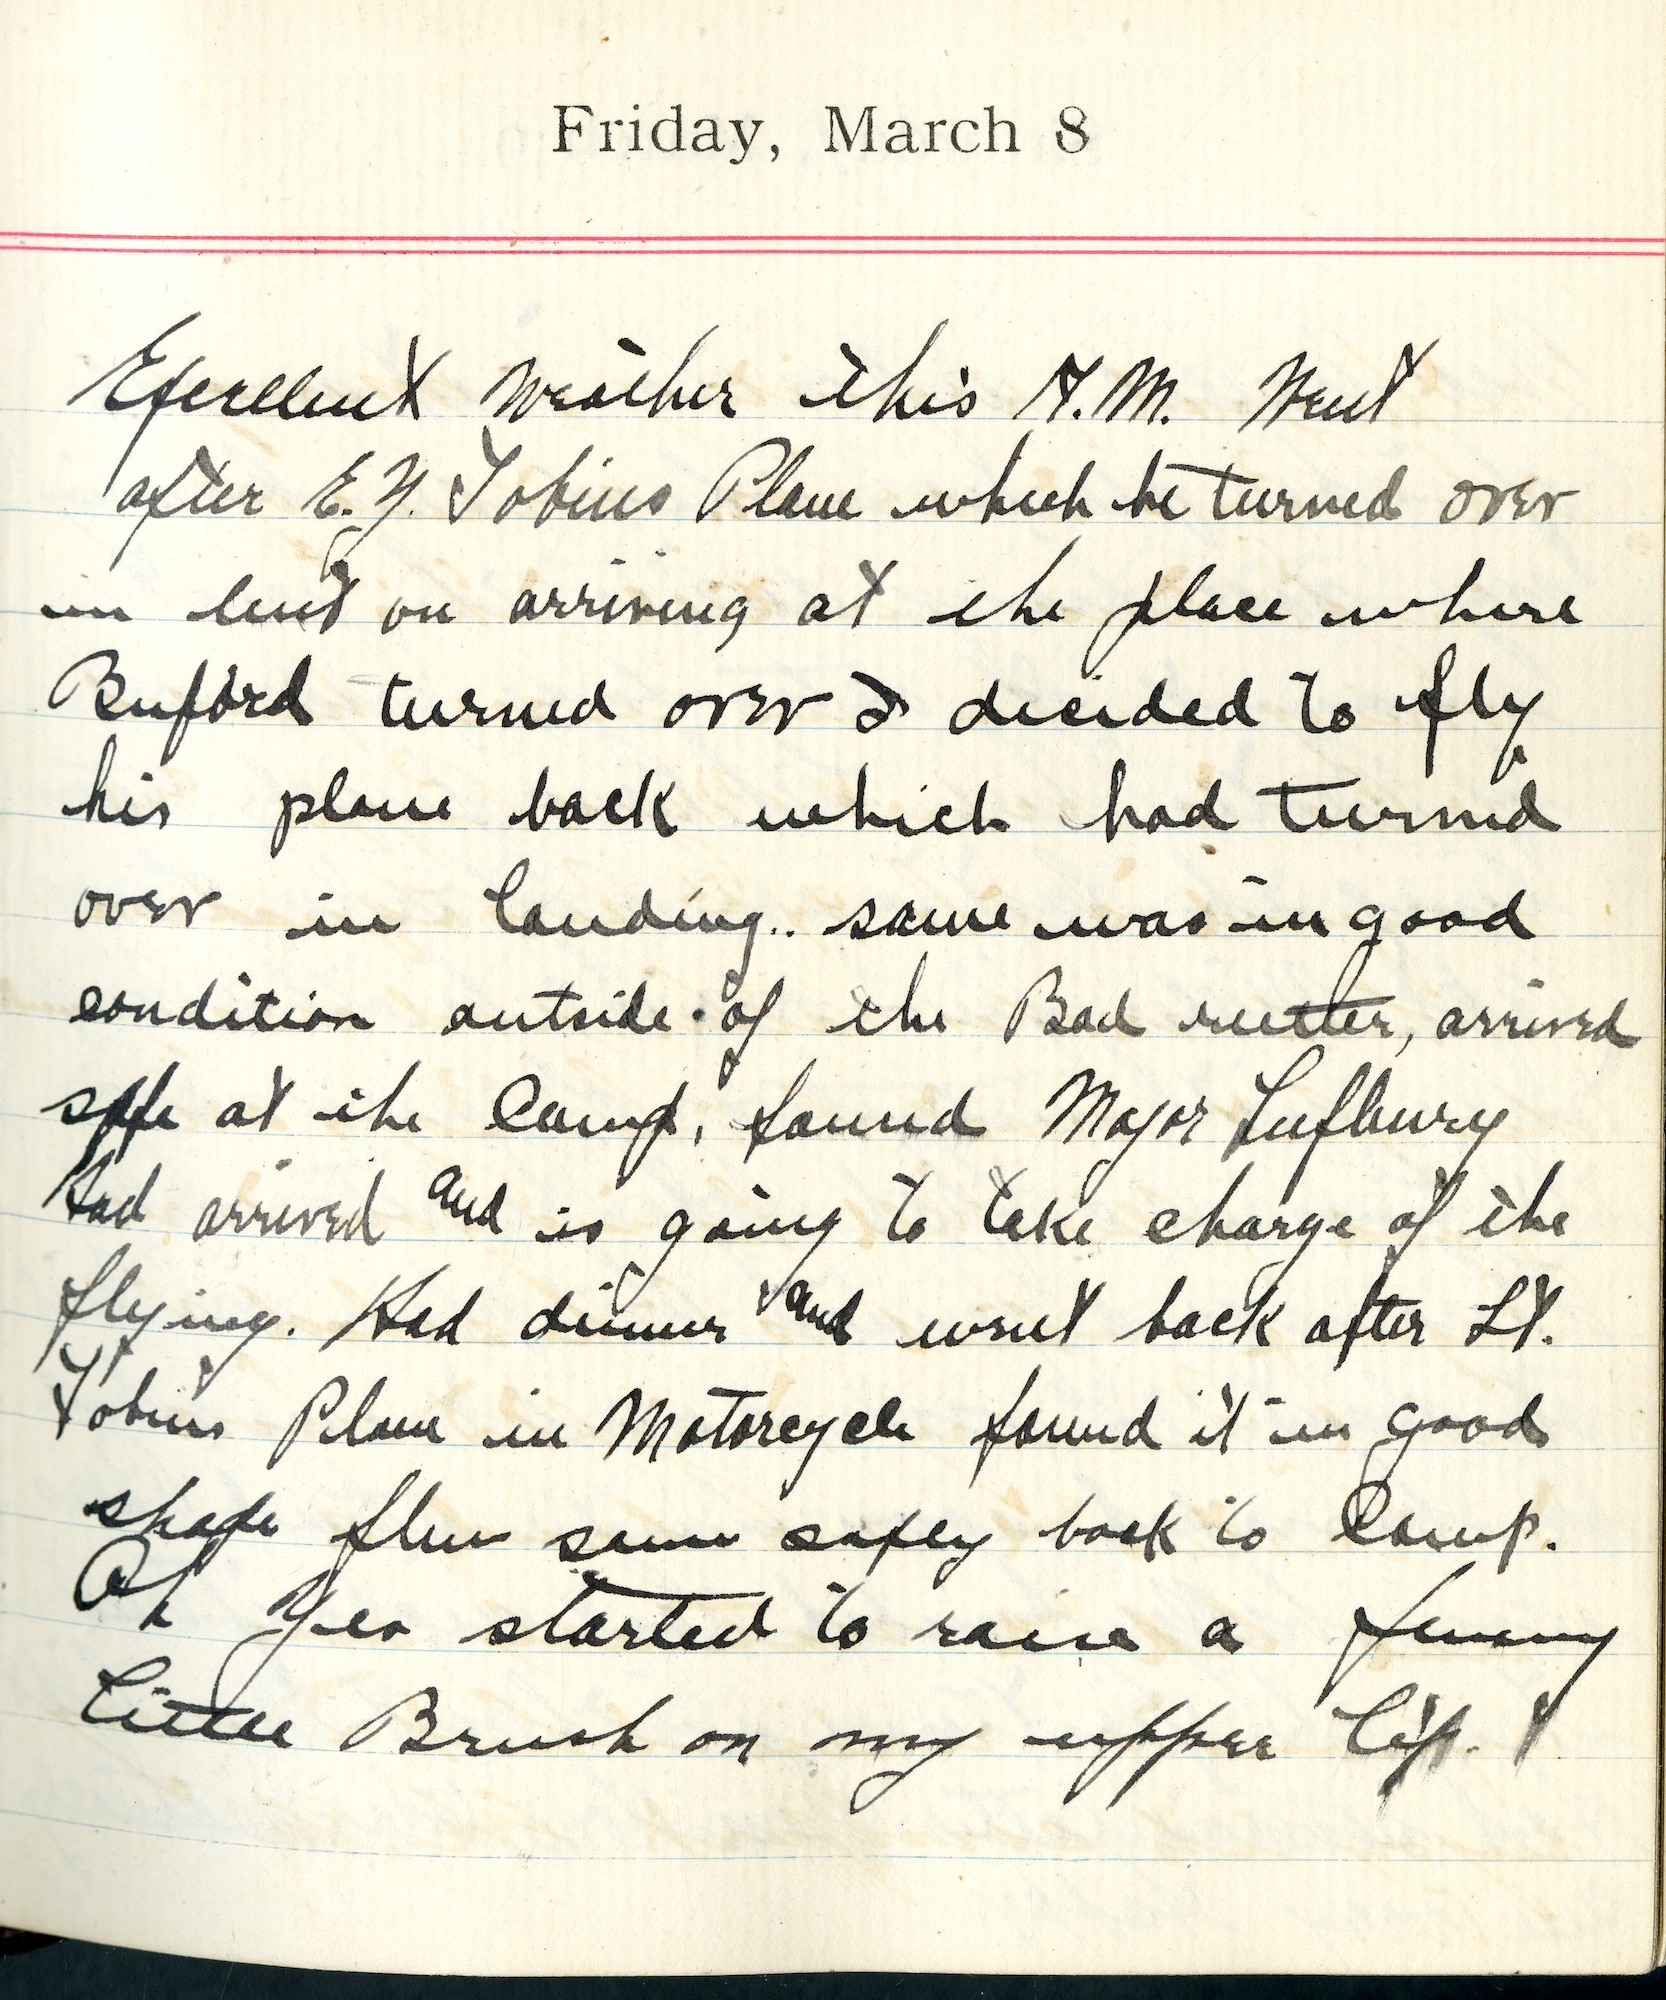 Capt. Edward V. Rickenbacker's 1918 wartime diary entry. (03/08/1918).

Excellent weather this A.M.  Went after E.G. [Lt. Edgar G.] Tobin’s plane, which he turned over in mud on arriving at the place where [Lt. Edward] Buford turned over.  I decided to fly his plane back which had turned over in landing. Same was in good condition outside of the bad weather, arrived safe at the camp.  Found Major [Raoul] Lufbery had arrived and is going to take charge of the flying.  Had dinner and went back after Lt. Tobin’s plane in Motorcycle. Found it in good shape.  Flew same safely back to camp.  Oh yea started to raise a funny little brush on my upper lip.